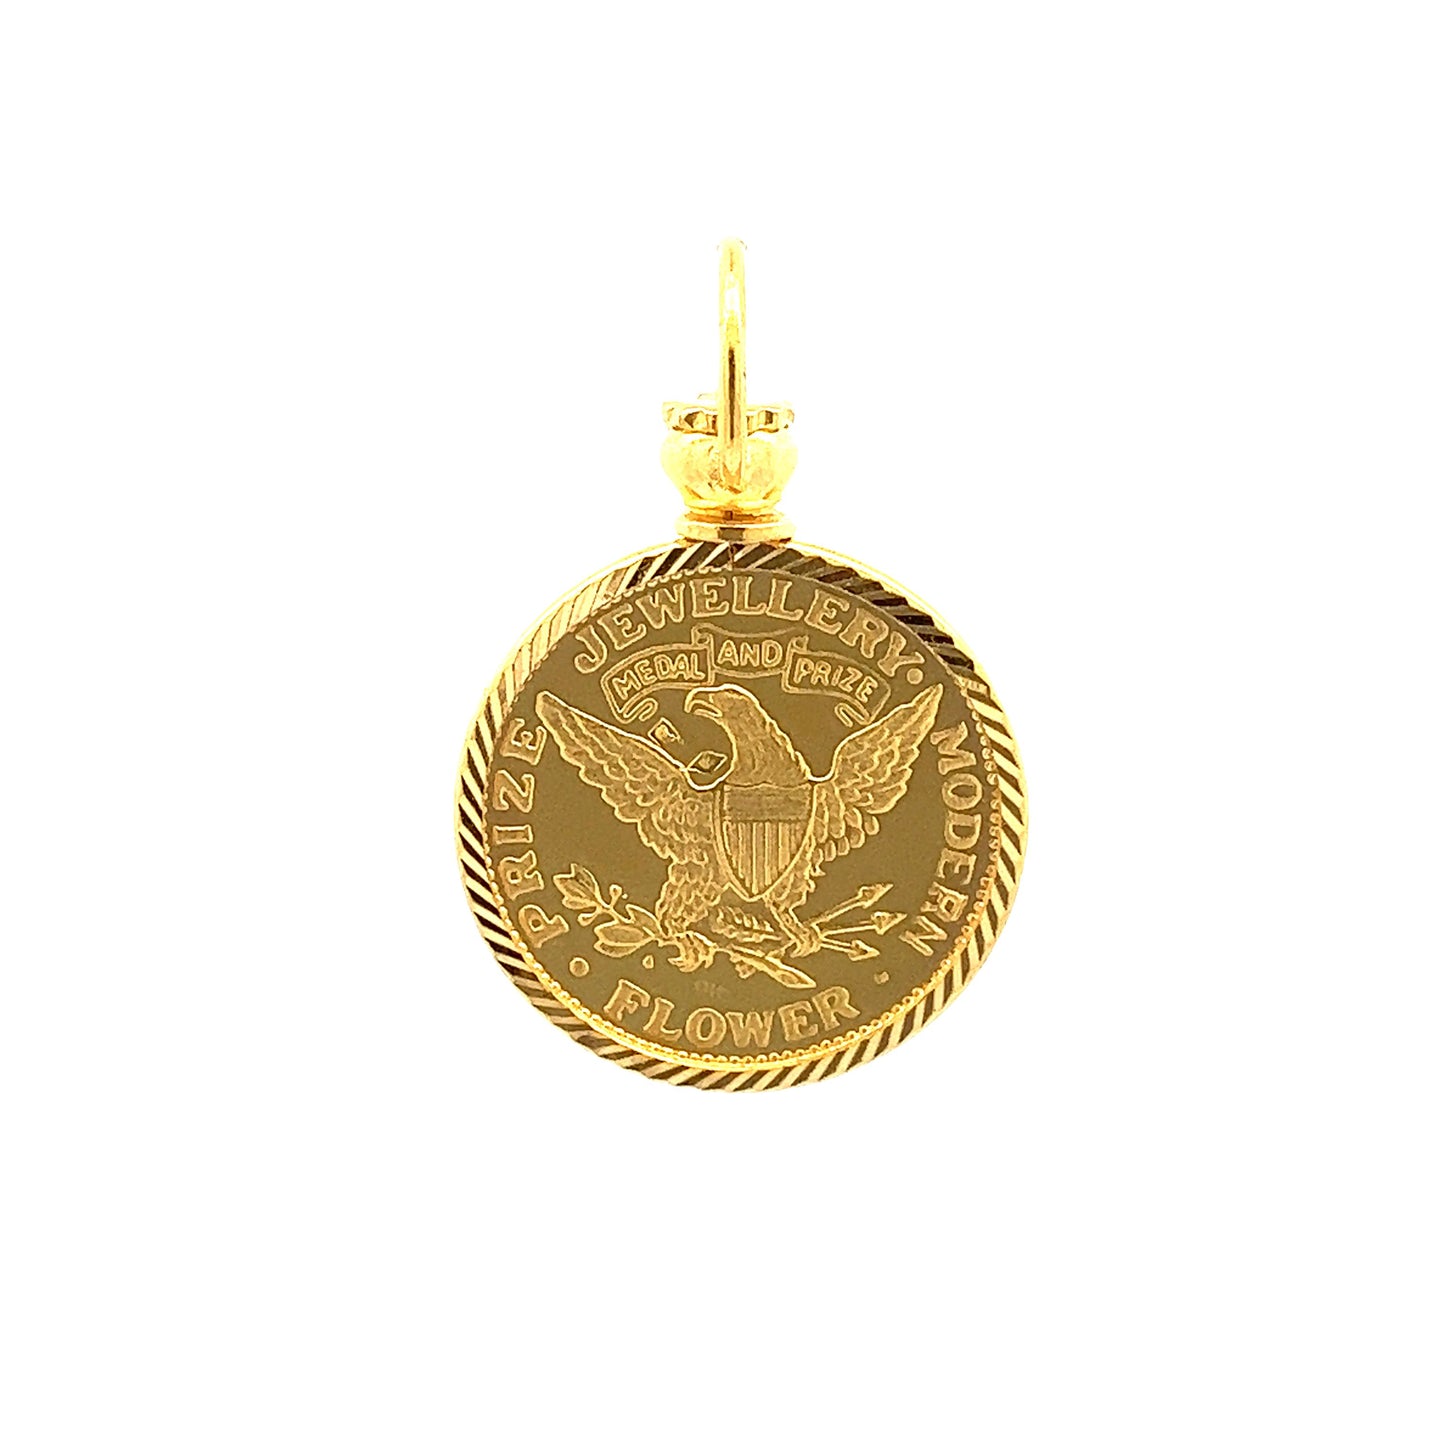 GOLD PENDANT ( 22K ) ( 11.64g ) - 0012101 Chain sold separately